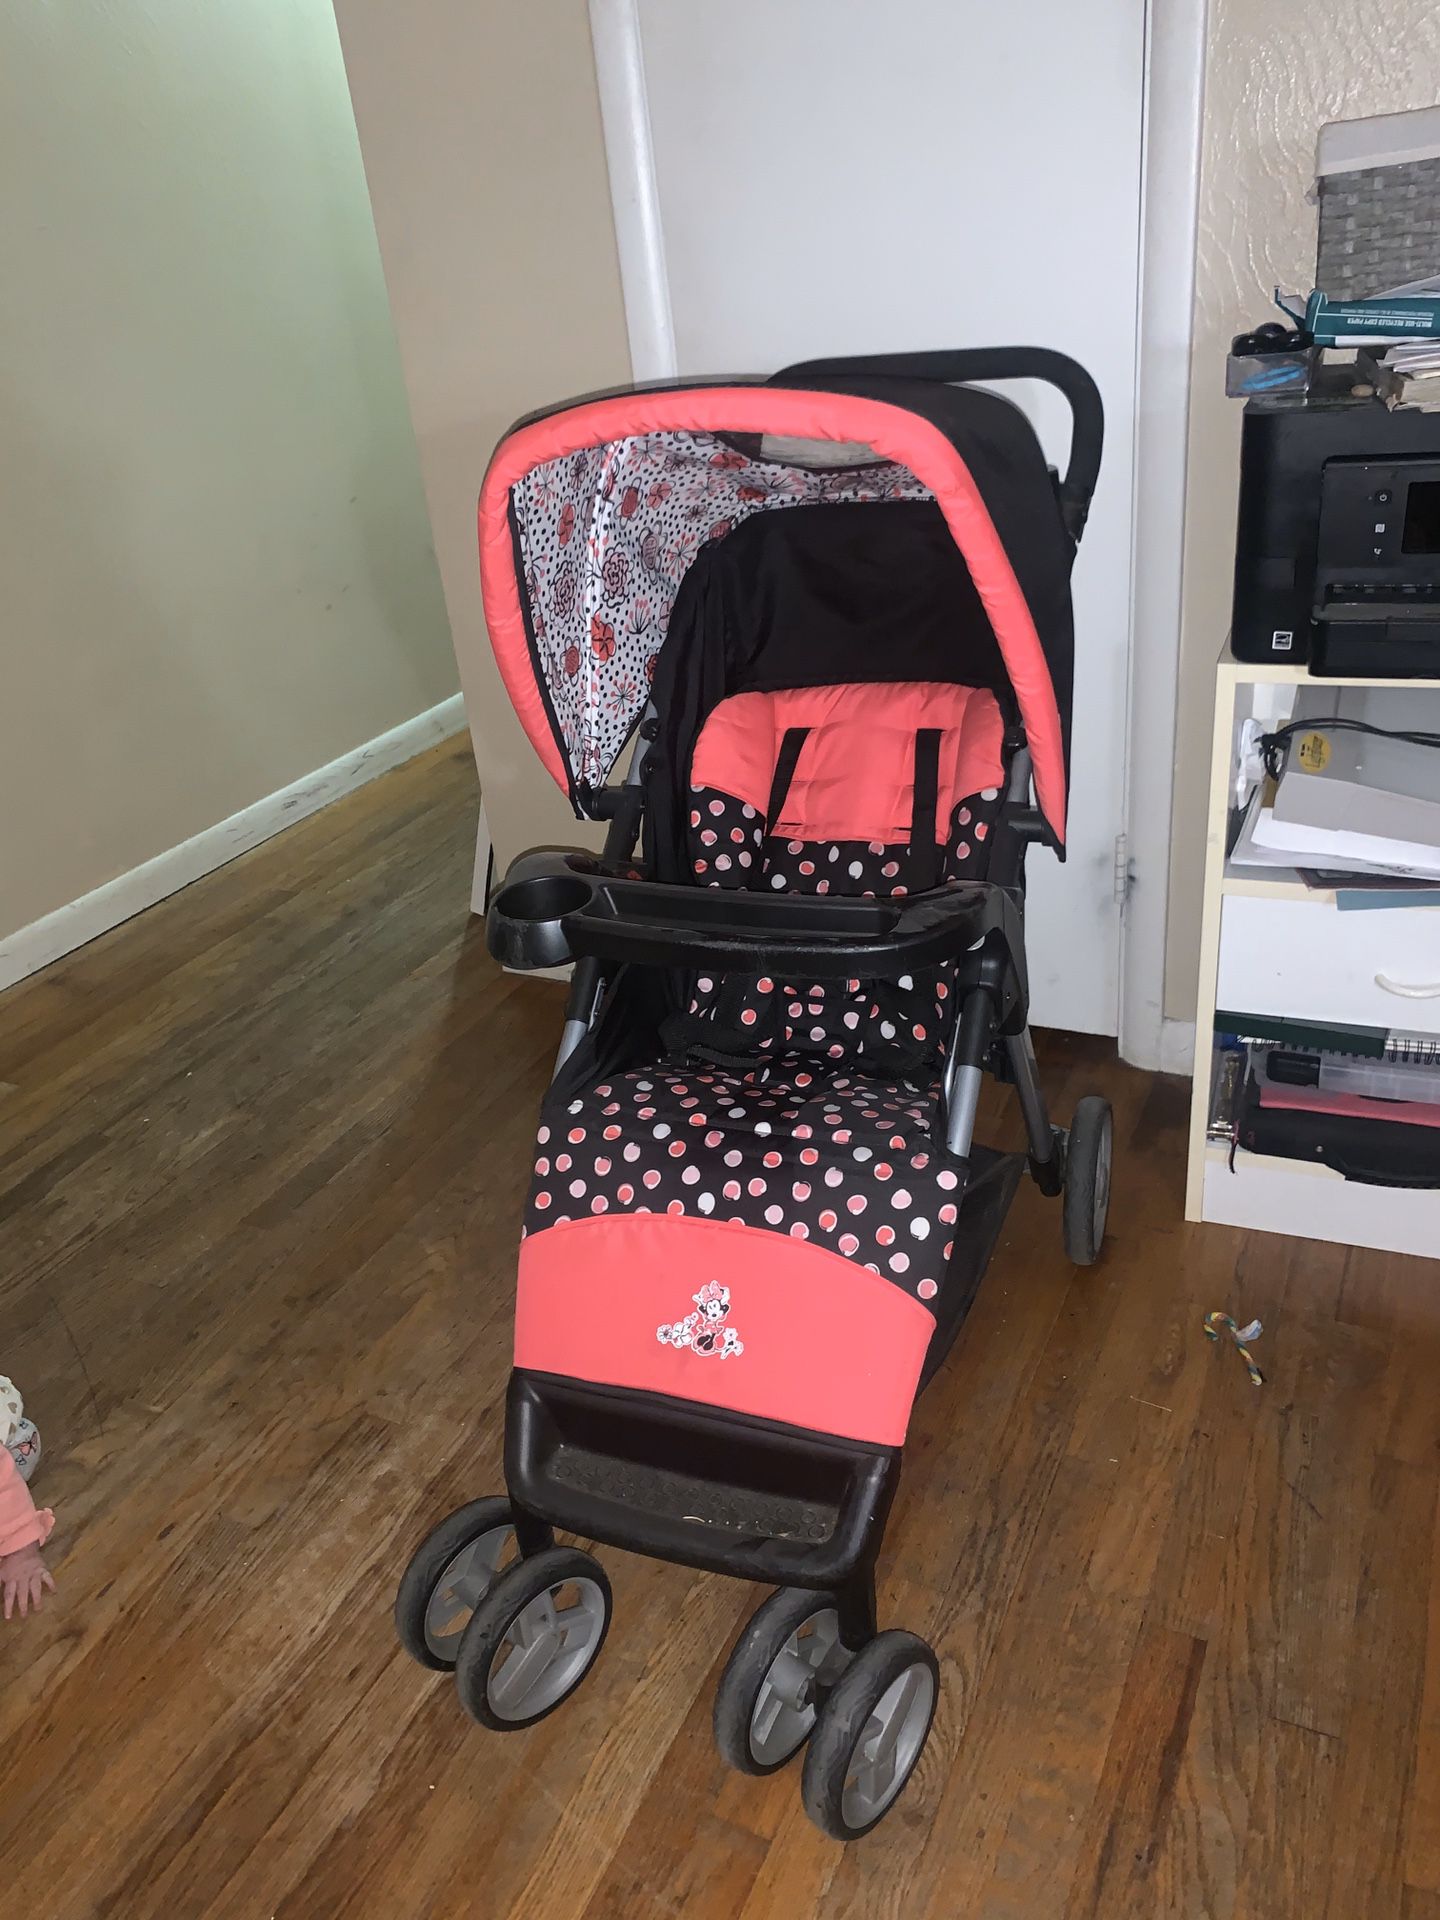 Minnie mouse stroller